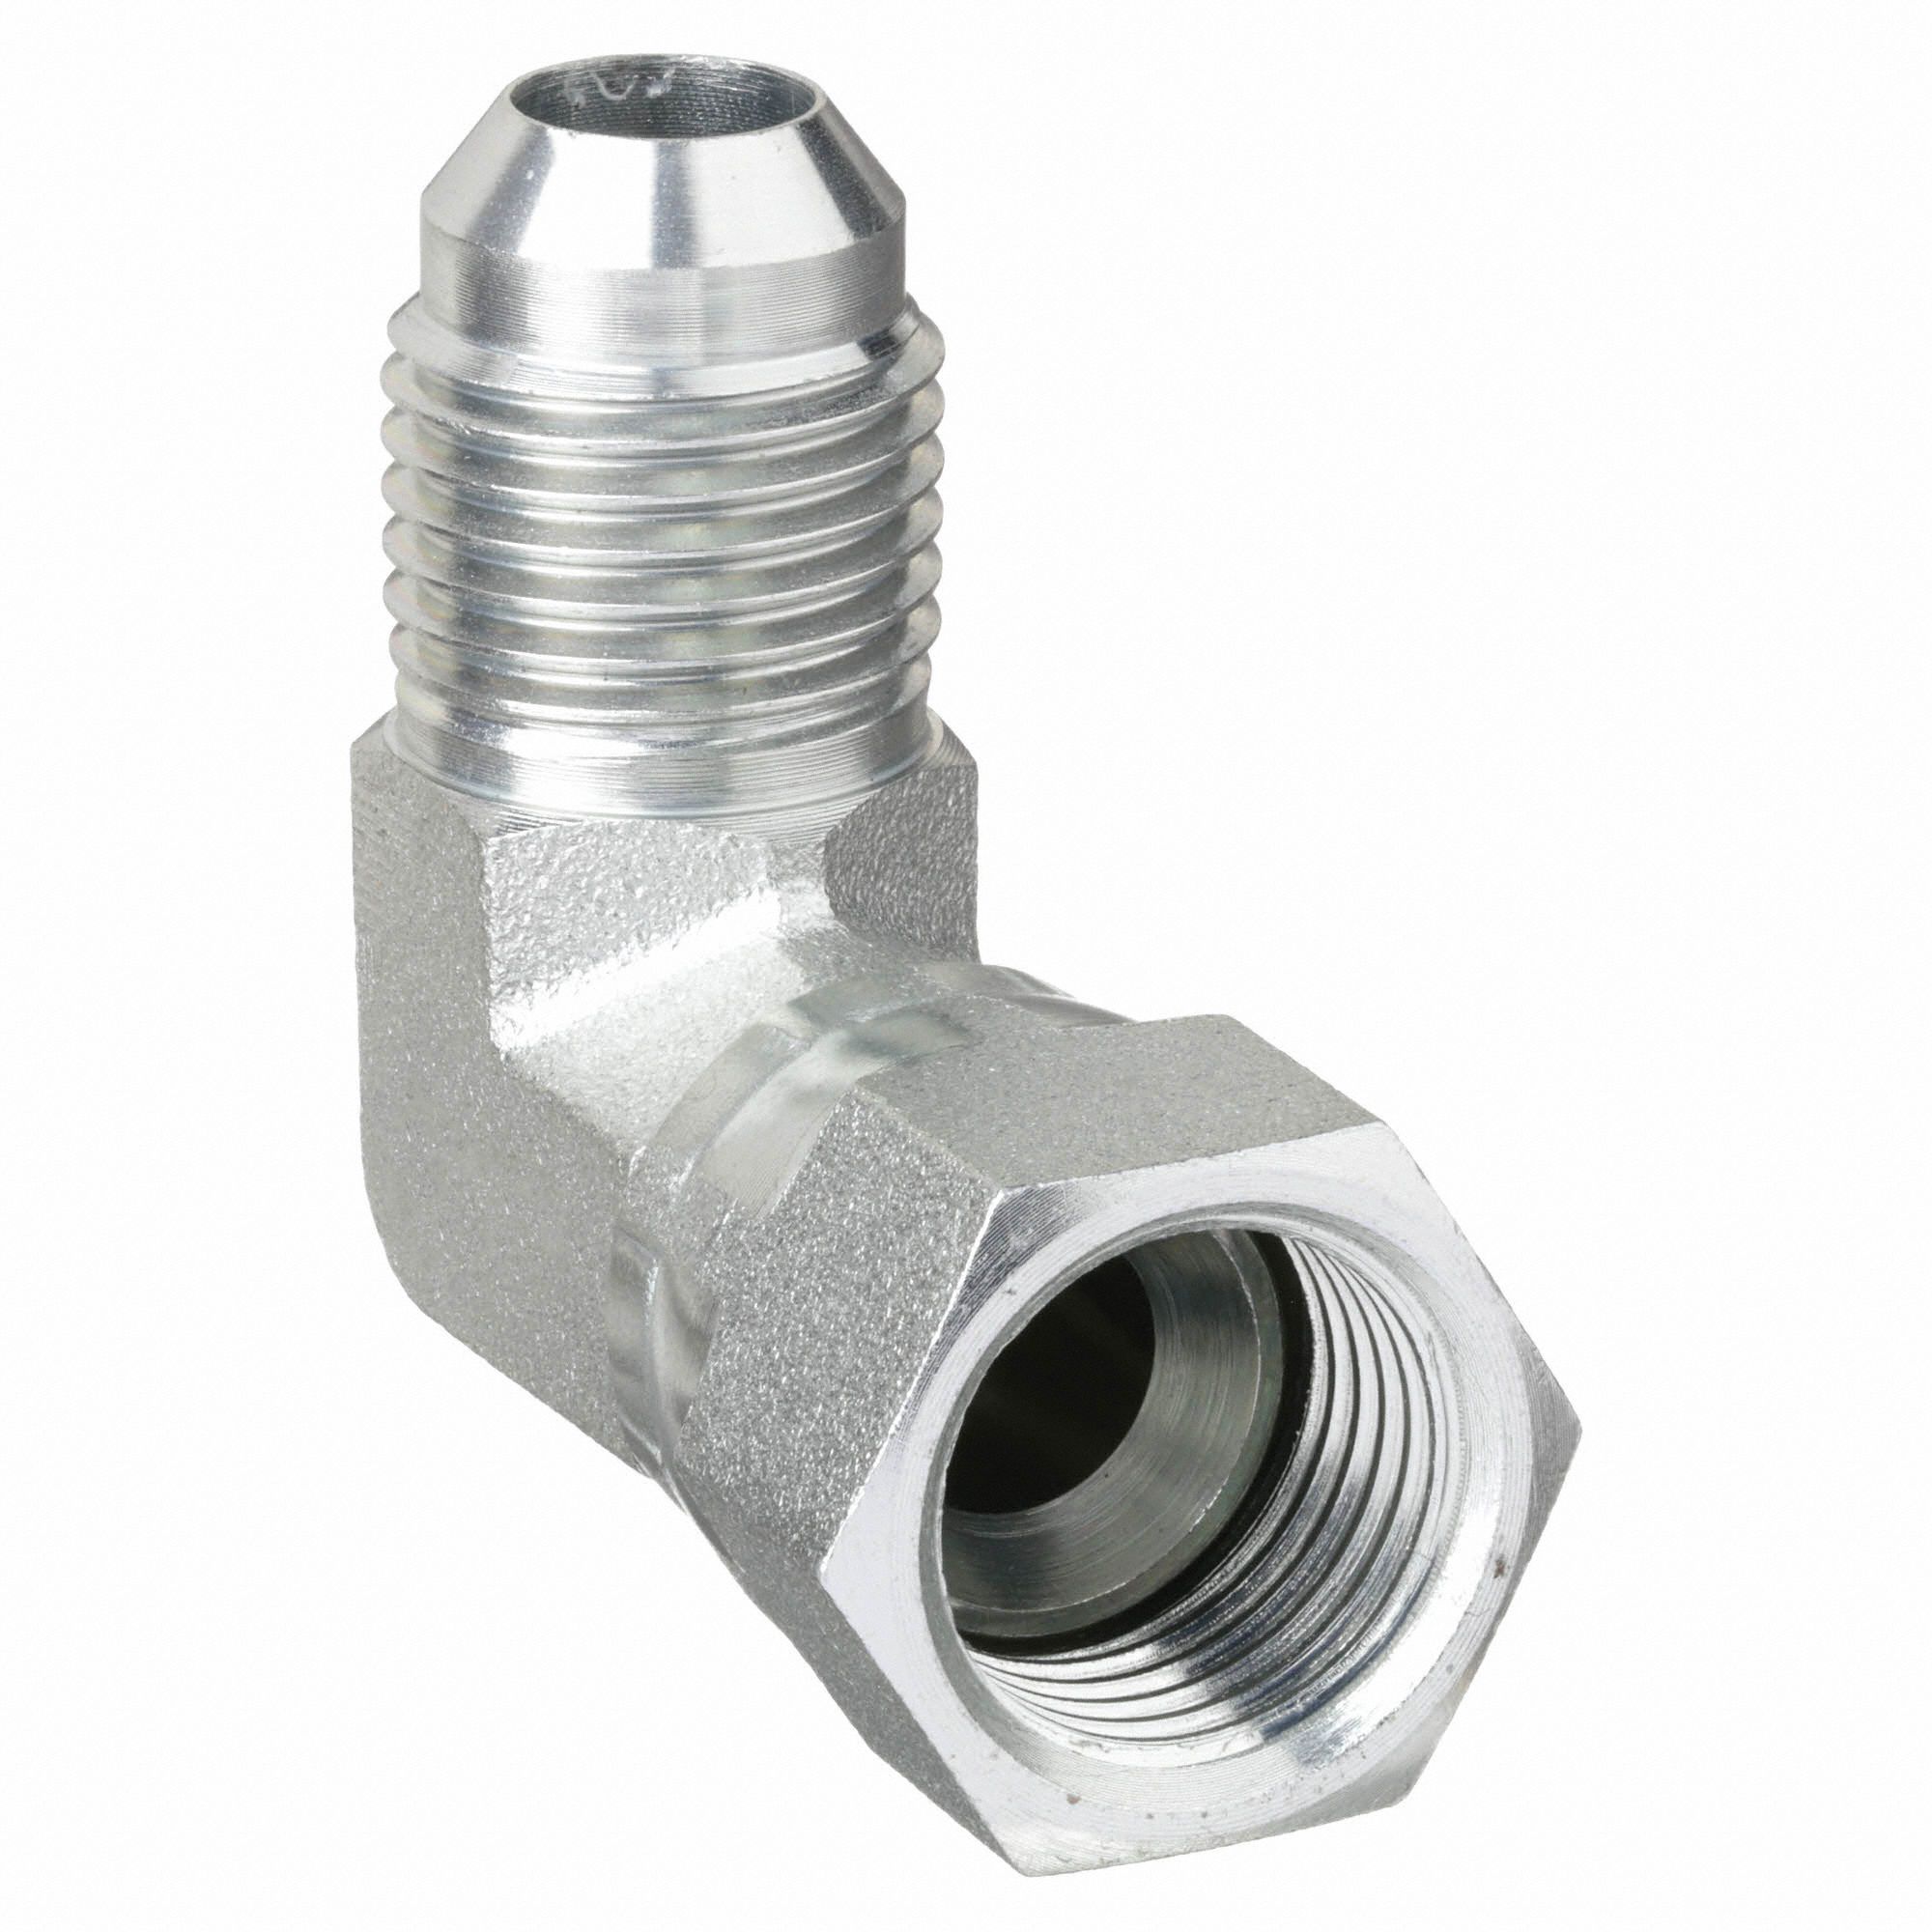 Hydraulic Hose Adapter Fitting Size 1/4 x 5/16 Pack of 5 Fitting Material Carbon Steel x Carbon Steel 